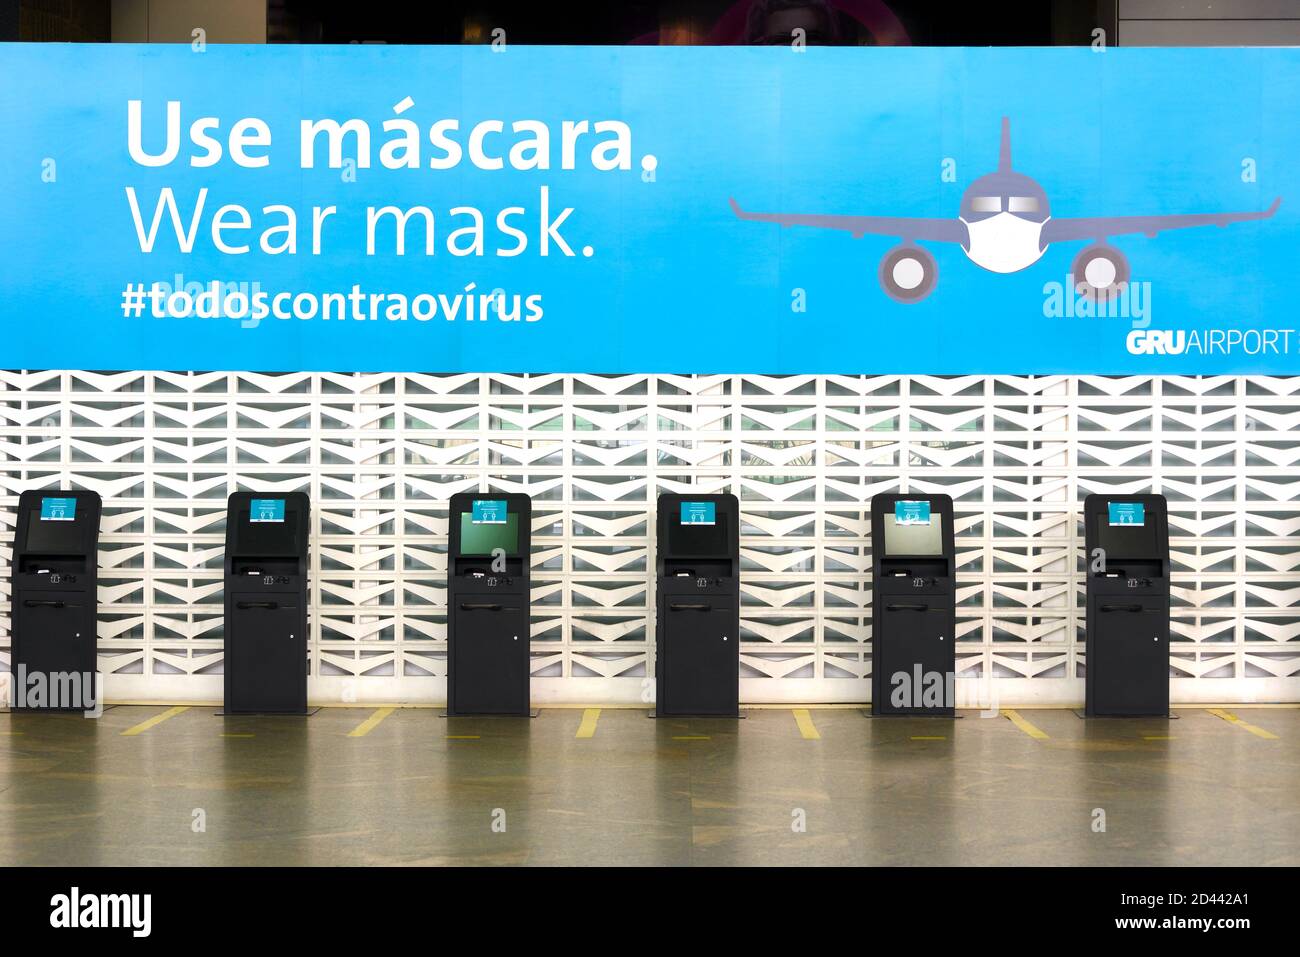 Guarulhos Airport Terminal 2 check-in totens empty during Coronavirus pandemic reminding passengers to wear mask. Airport precautions due to Covid 19. Stock Photo